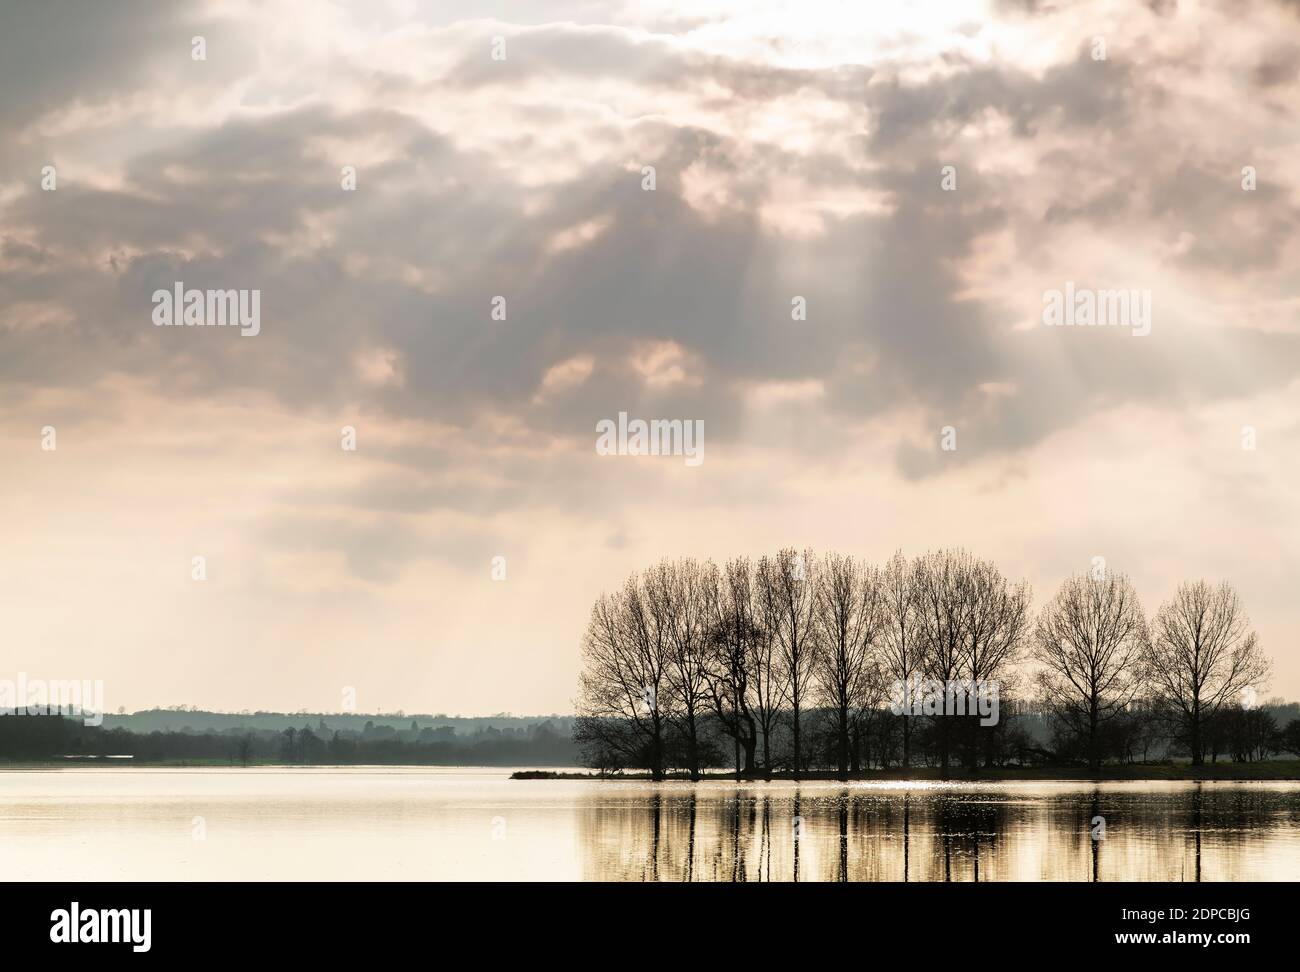 An image of  backlit trees on a spring day from Rutland Water, Rutland, England, UK. Stock Photo